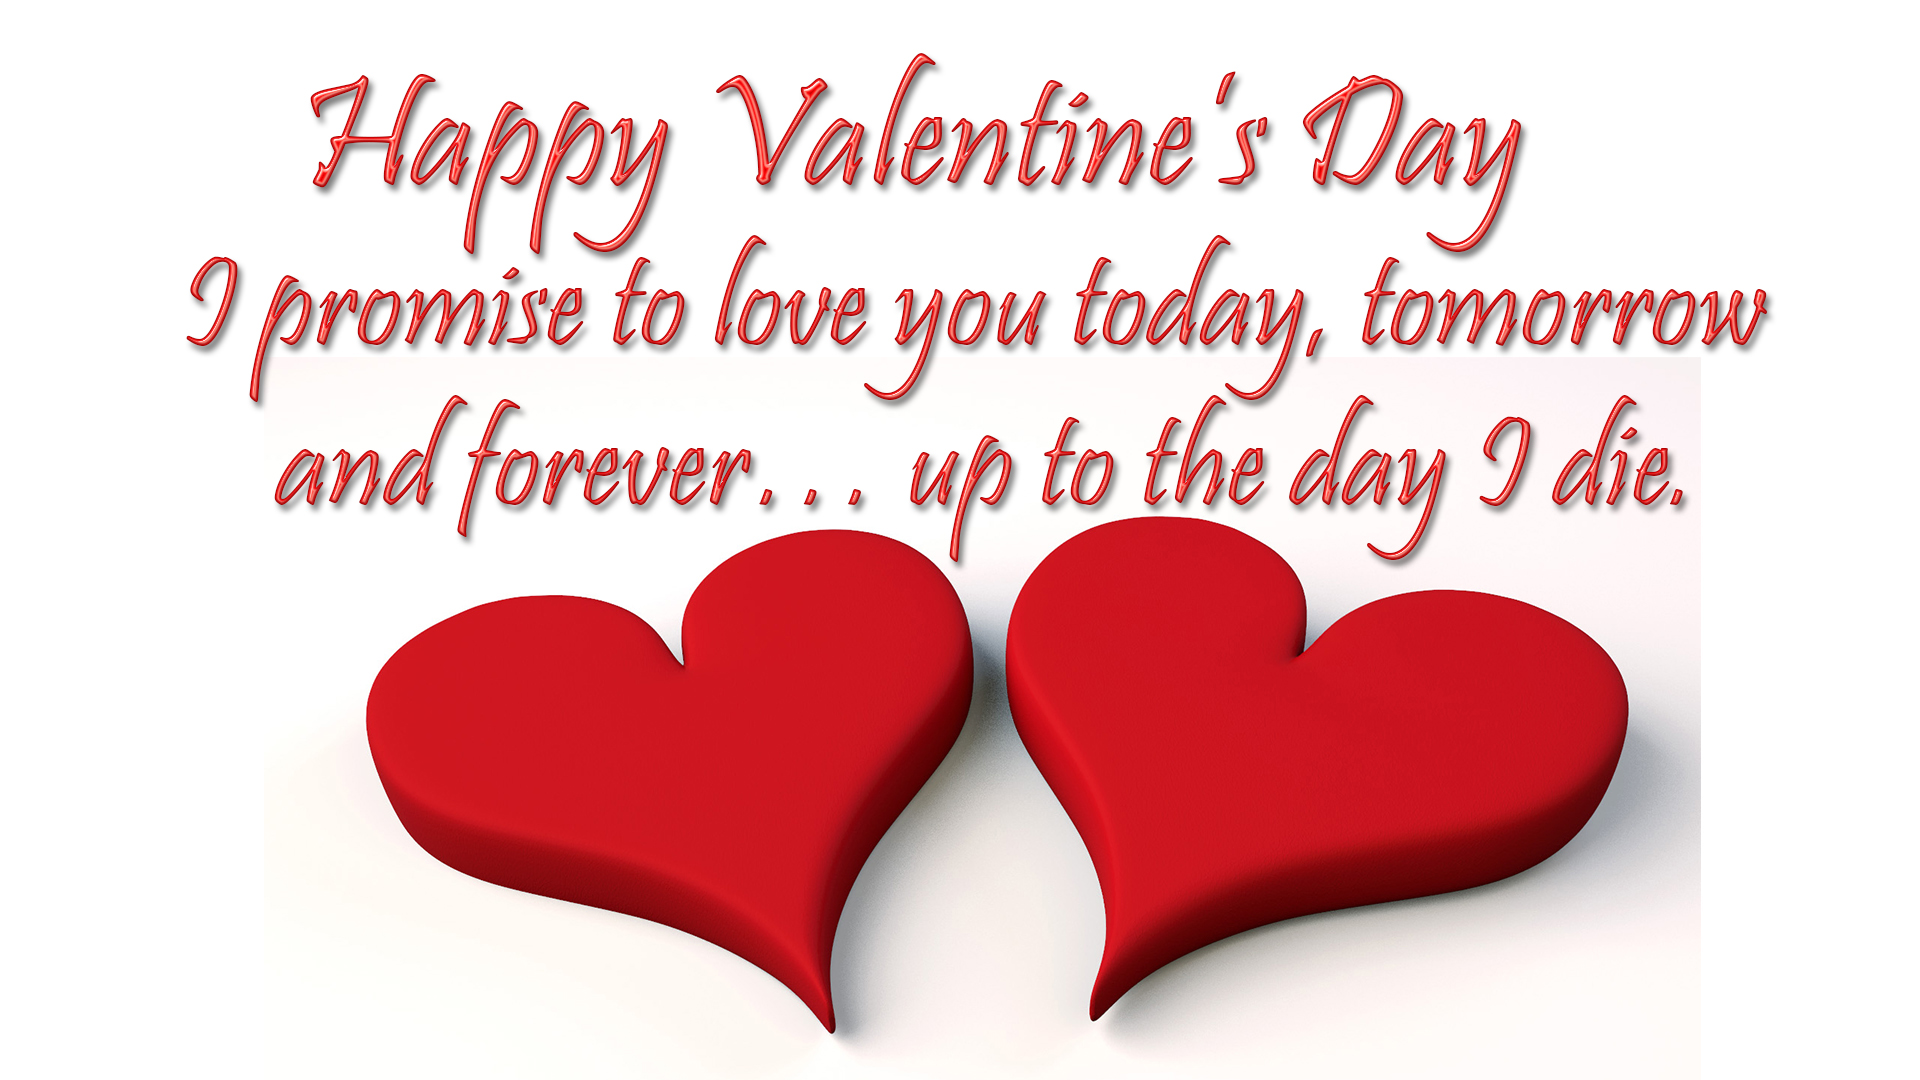 lovely valentines day wishes image